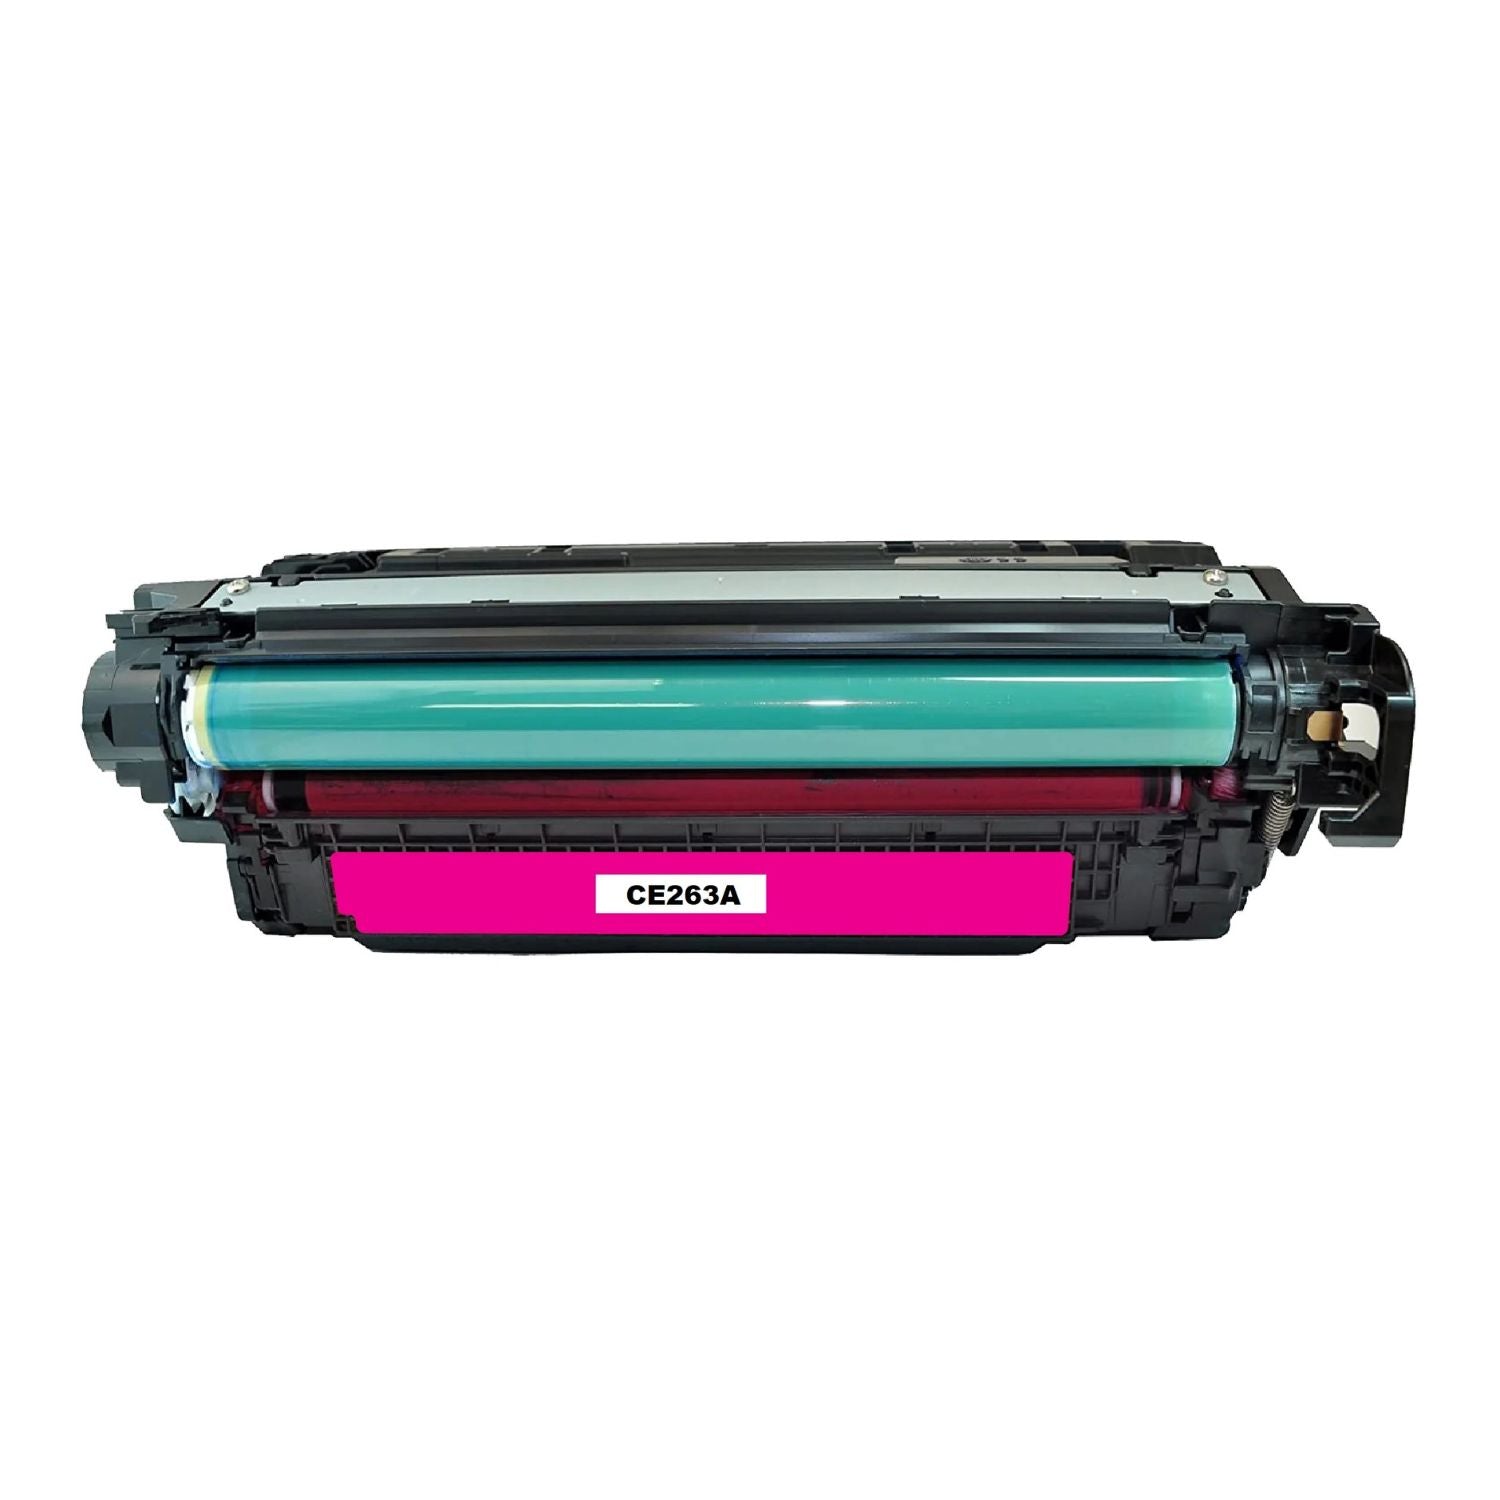 Absolute Toner AbsoluteToner Toner Laser Cartridge PREMIUM QUALITY Compatible With HP Magenta 648A (CE263A) HP Toner Cartridges